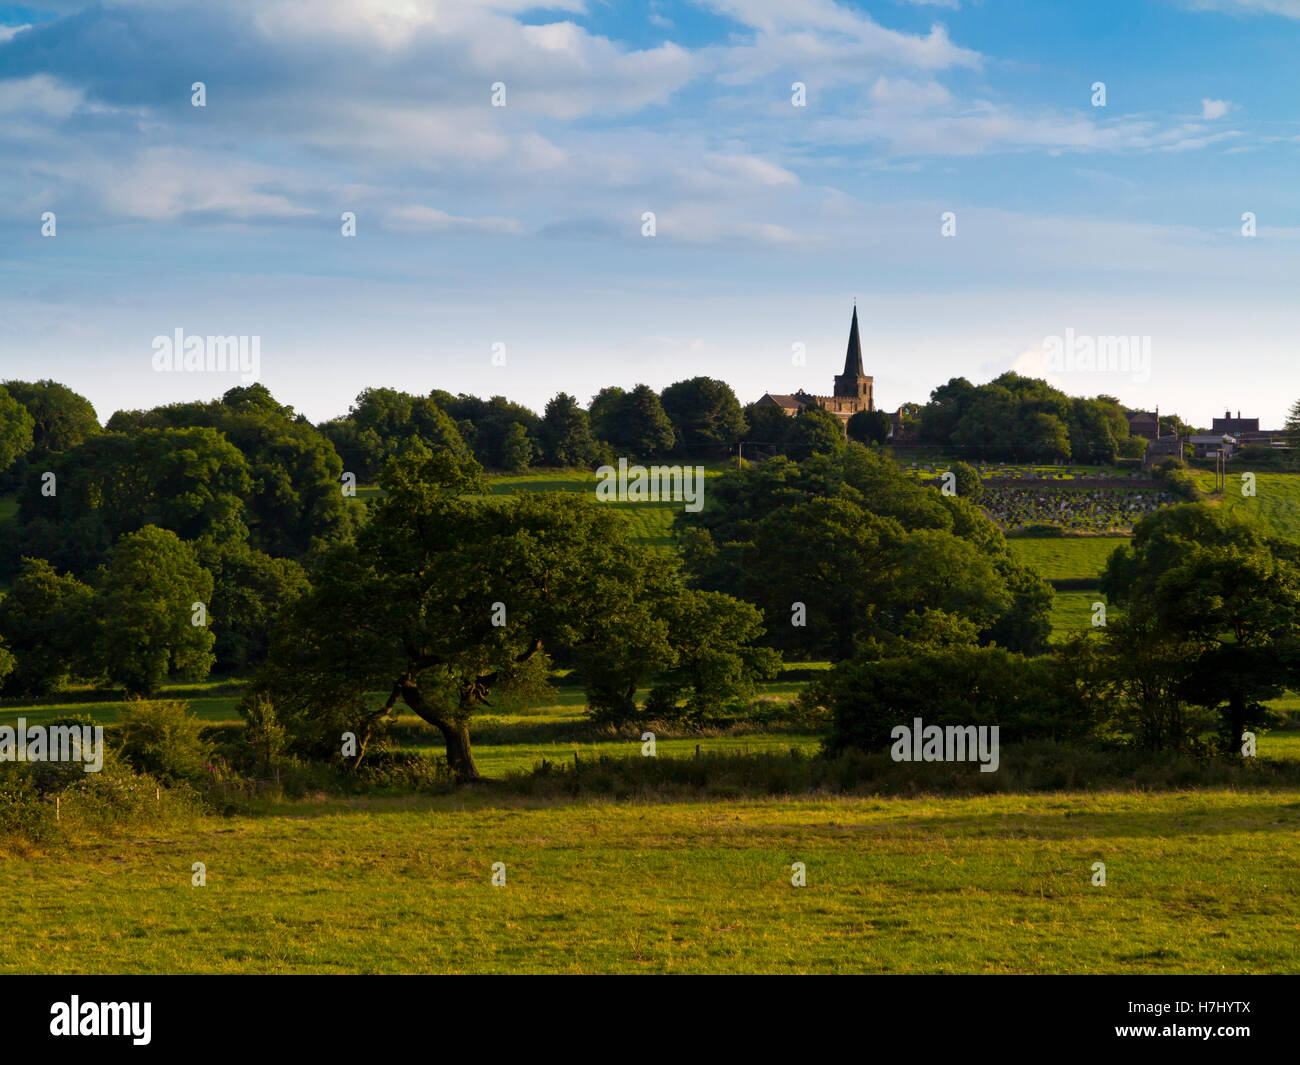 View across the Peak District countryside towards the spire of Crich village church in summer Derbyshire England UK Stock Photo